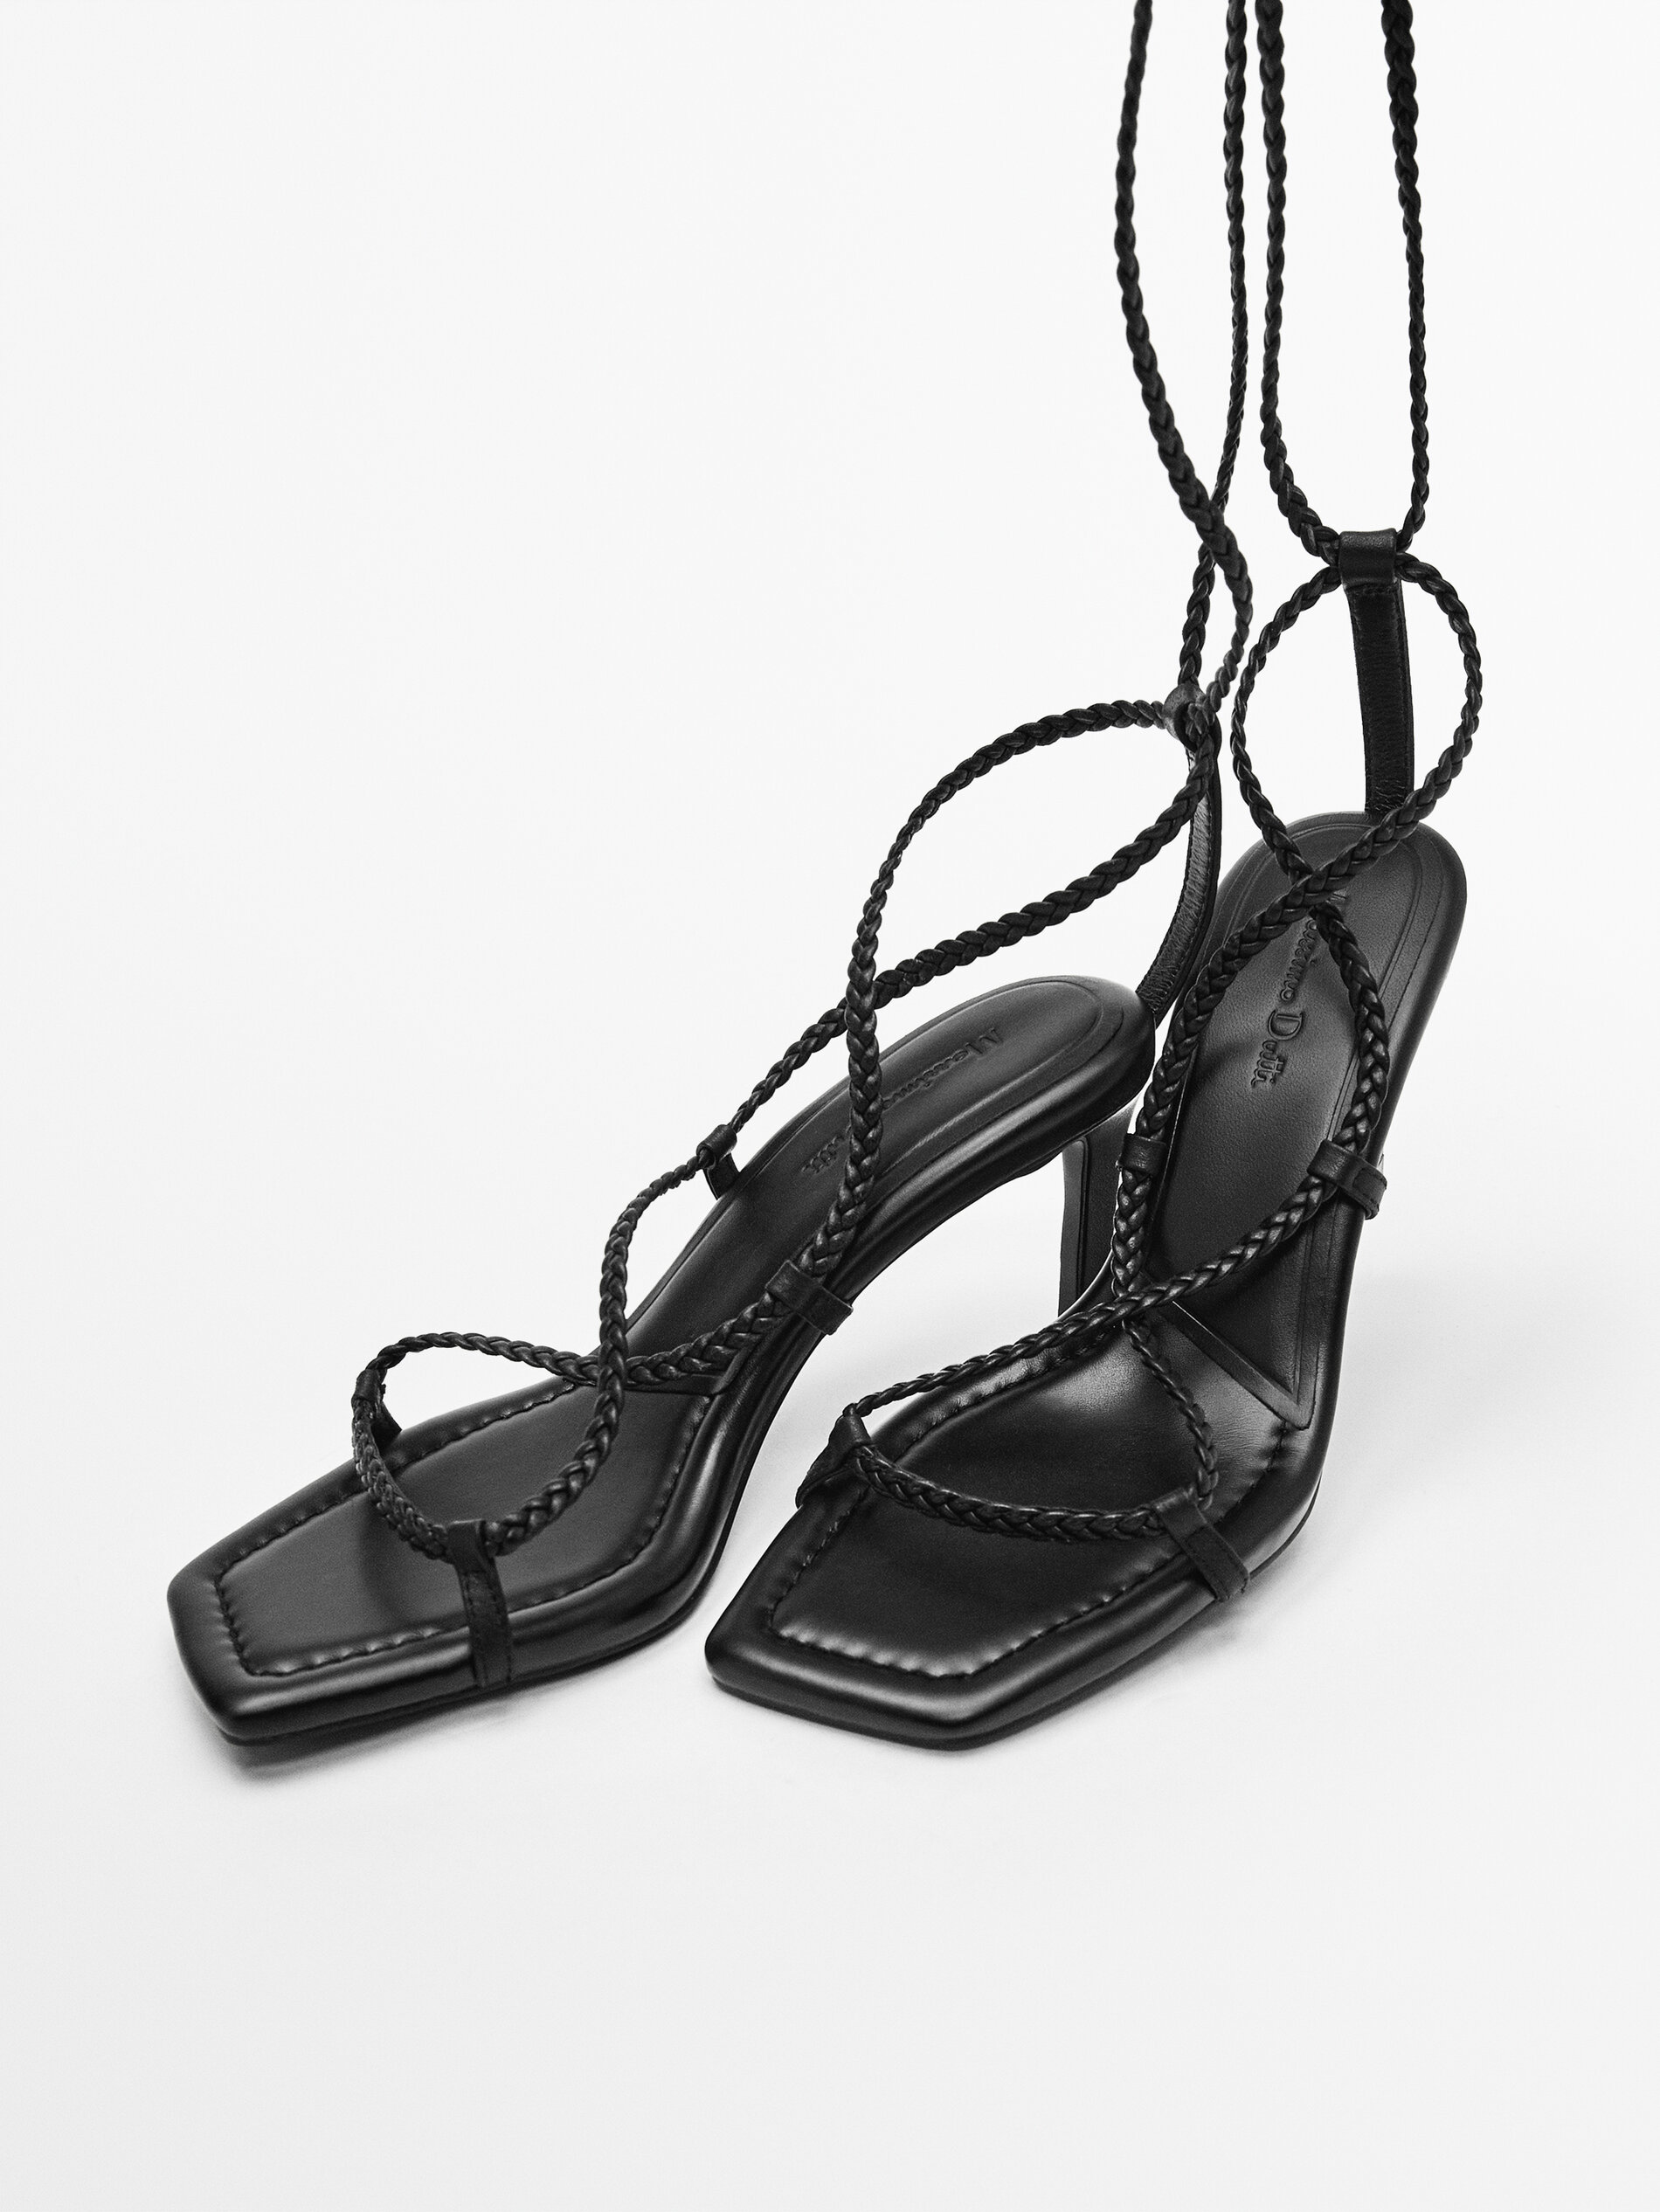 HEELED LEATHER SANDALS WITH PLAITED STRAPS